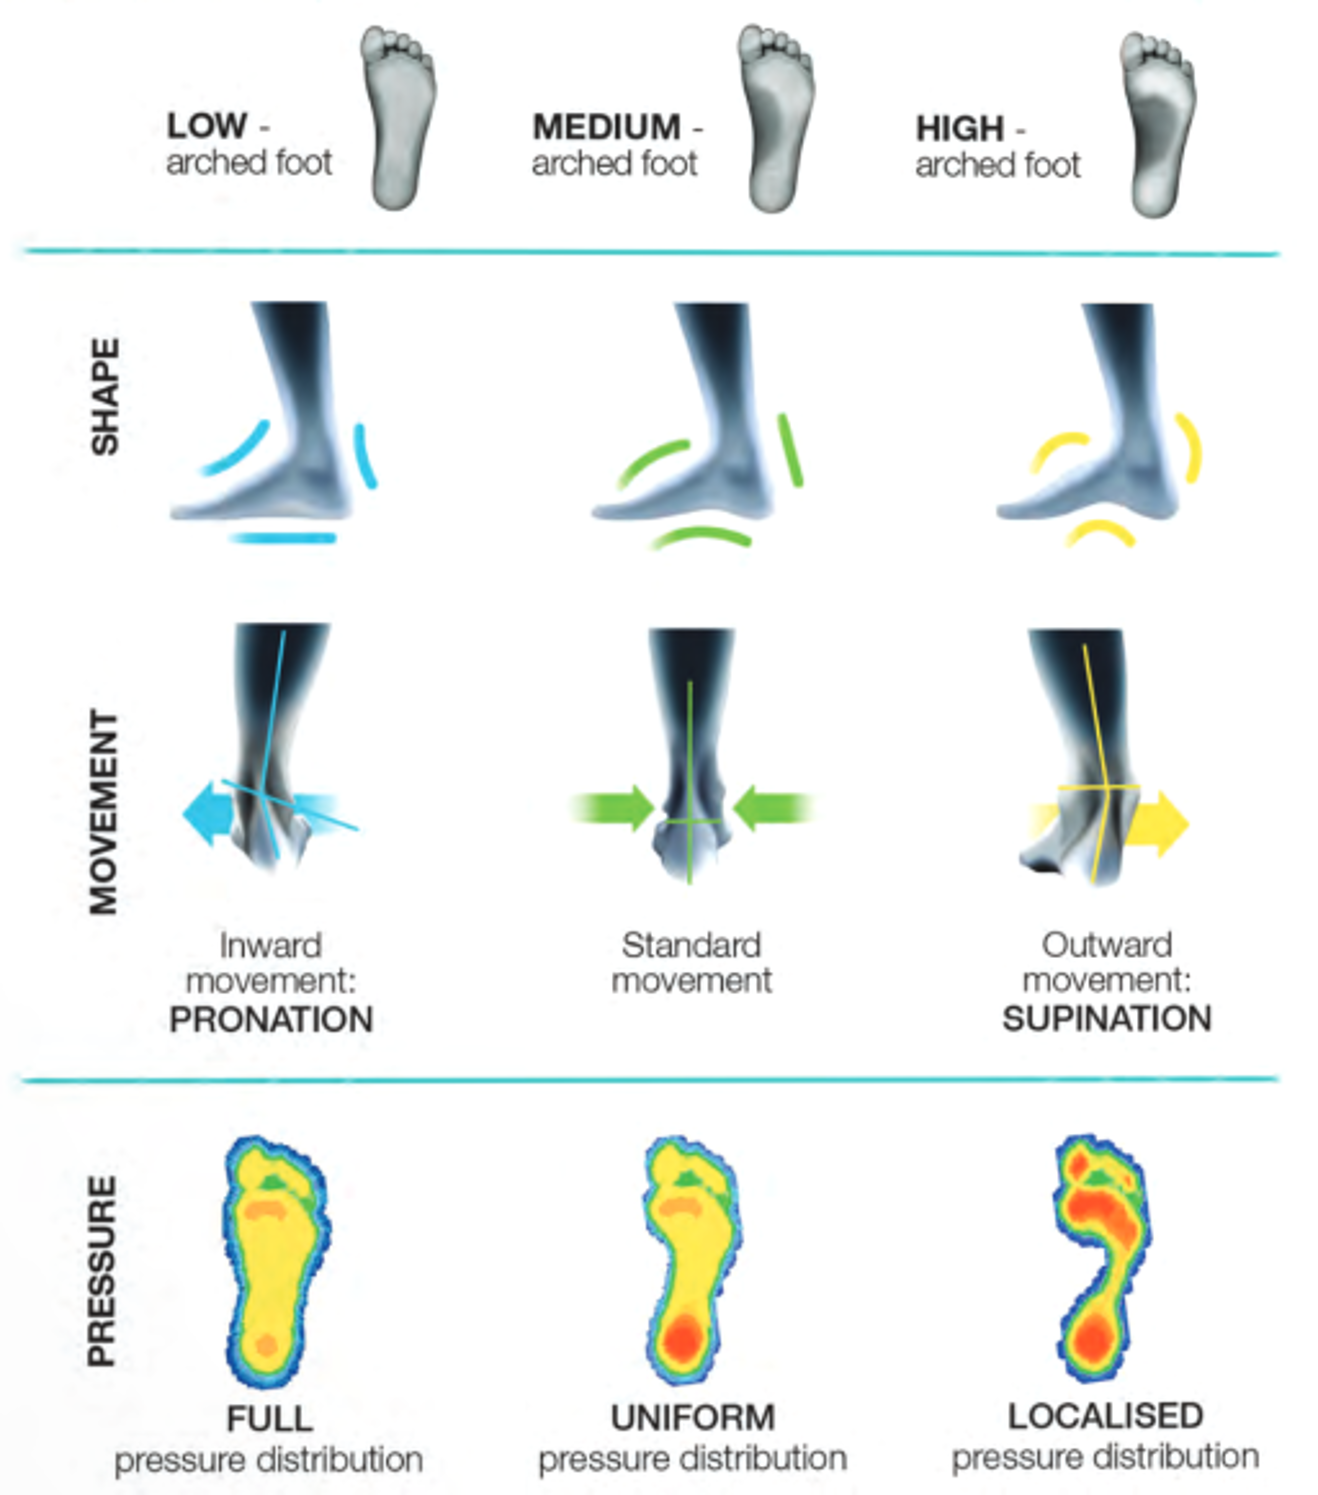 Using heat impression, it can identify the individuals’ correct arch type and match the appropriate arch support footbed for individual feet.